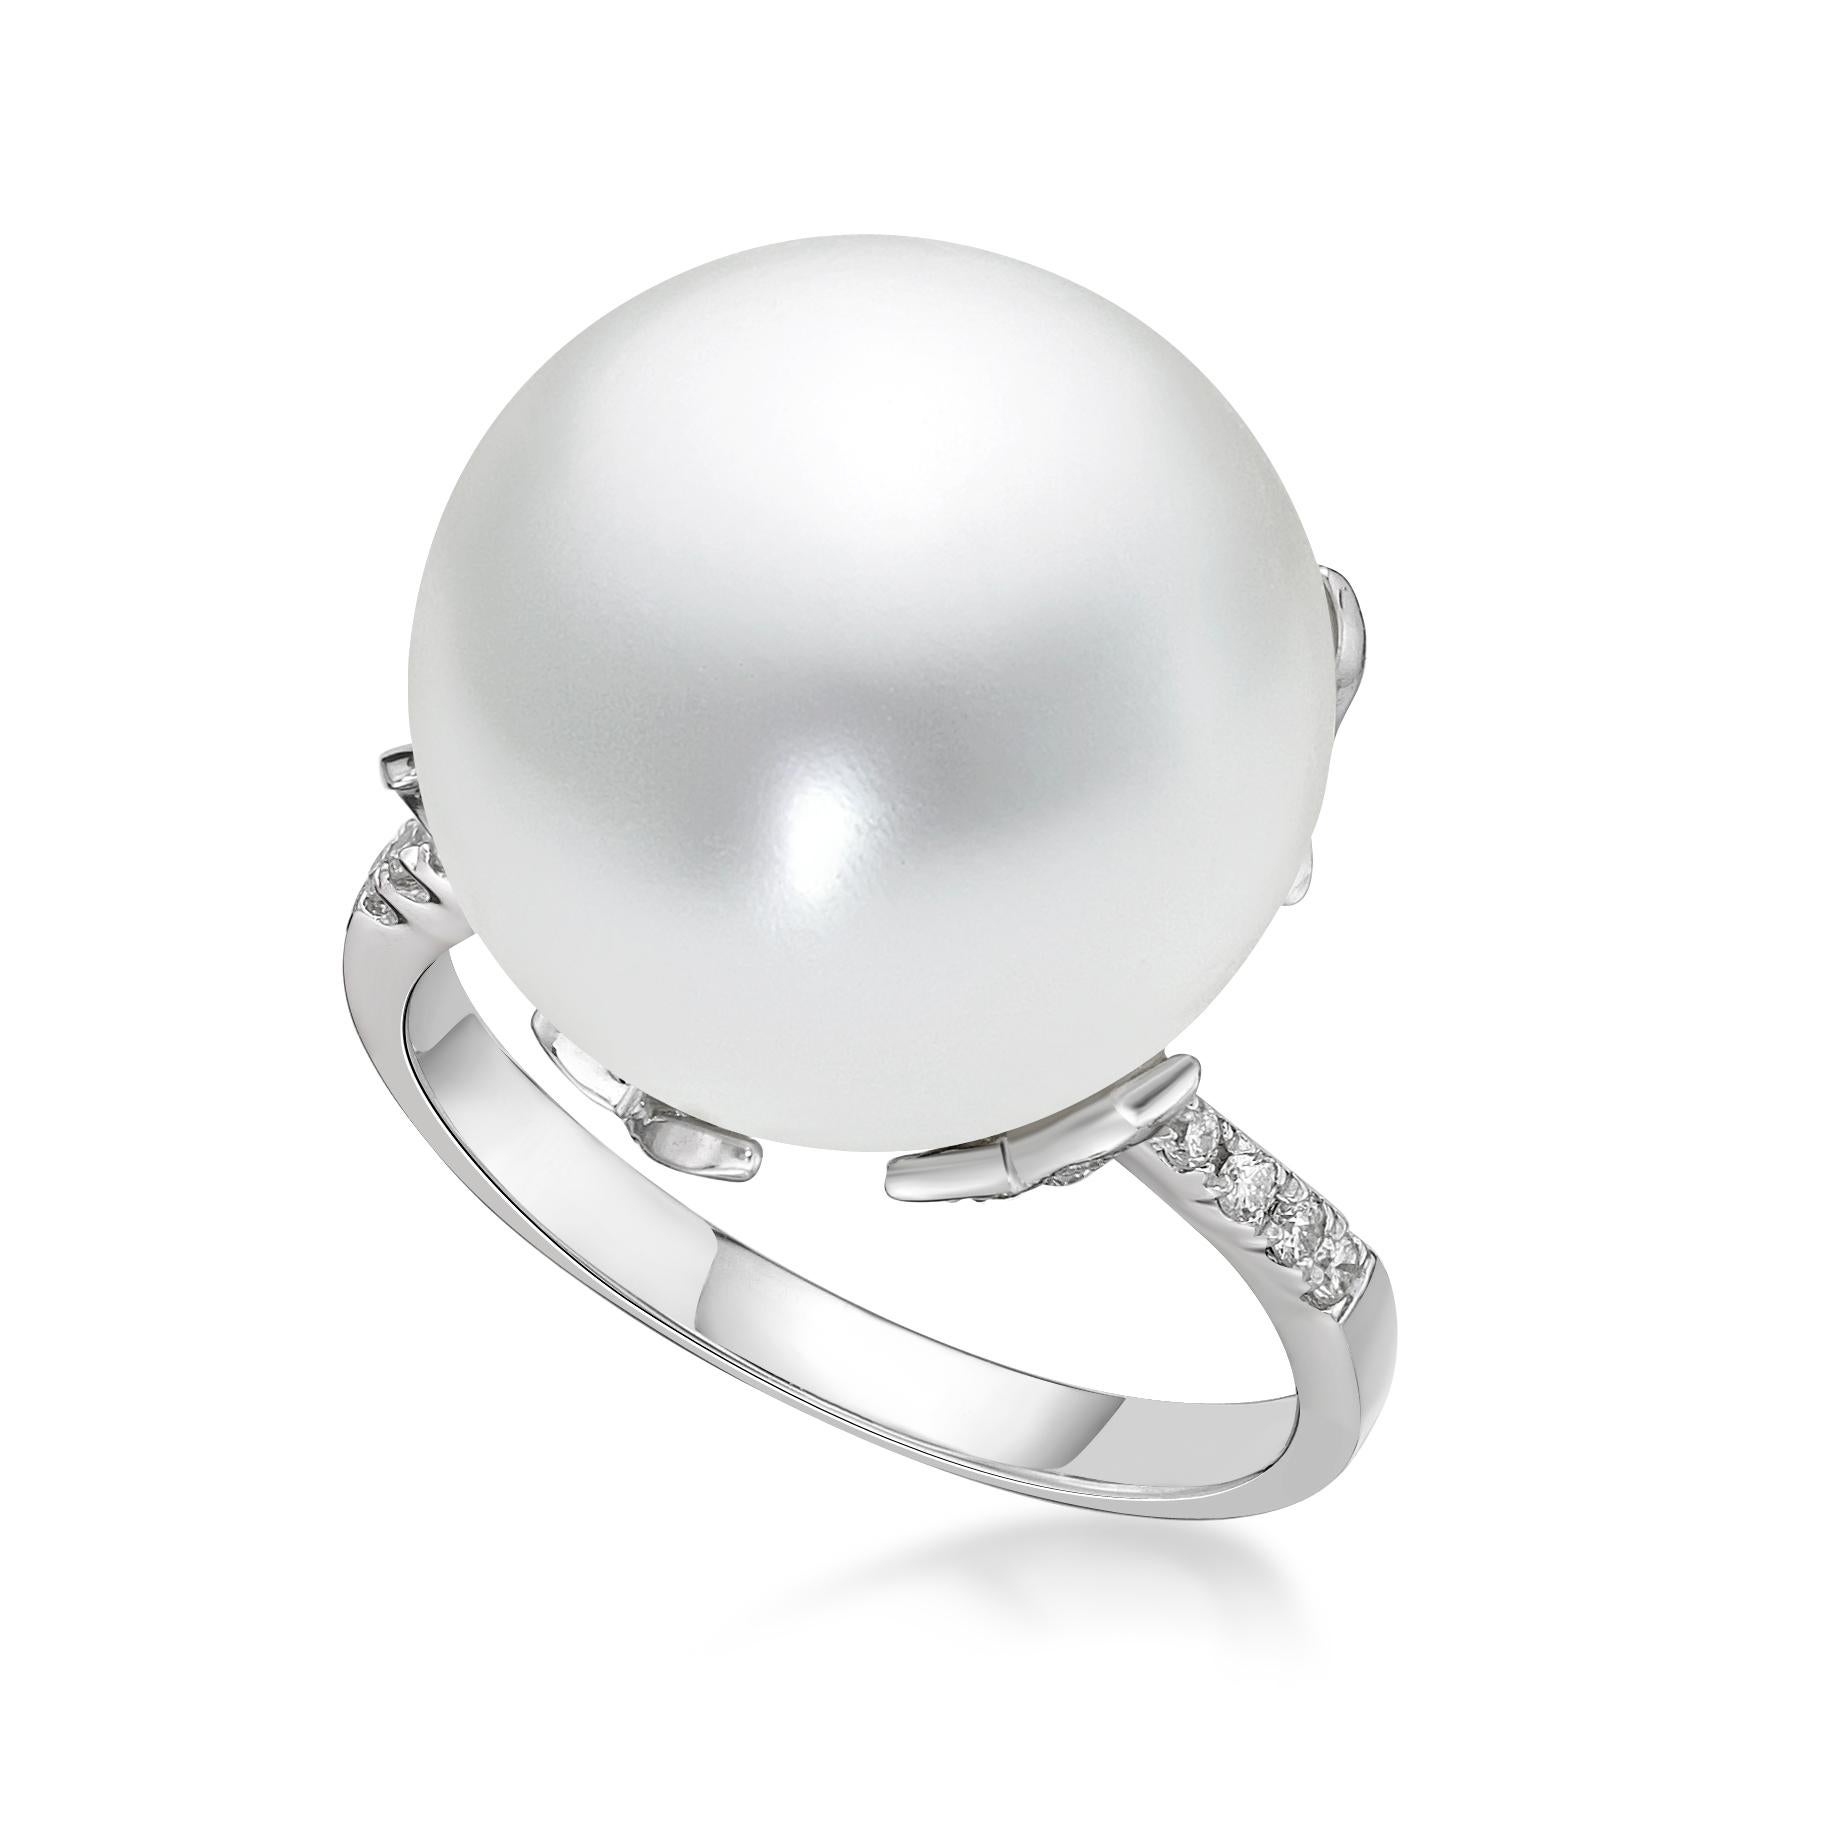 White pearls symbolize innocence, beauty, sincerity, and new beginnings. This is what makes the white pearl a true classic for bridal jewelry.

The center pearl as 15mm, and the side diamond as 0.22 carat, made in 18K white gold.
